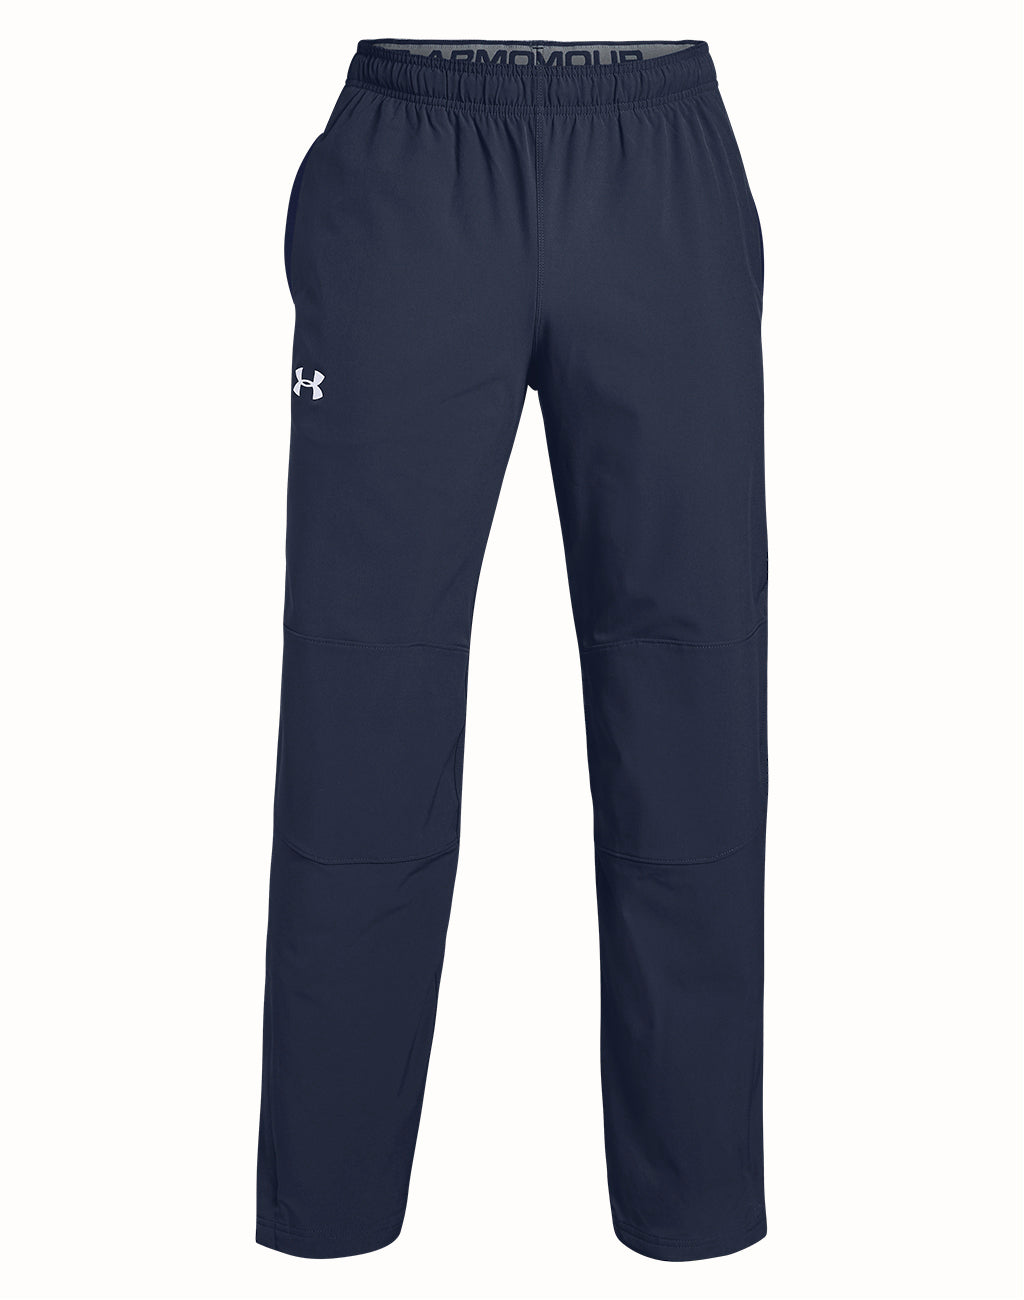 Men's Under Armour Hockey Warm Up Pant | Brand name clothing and ...